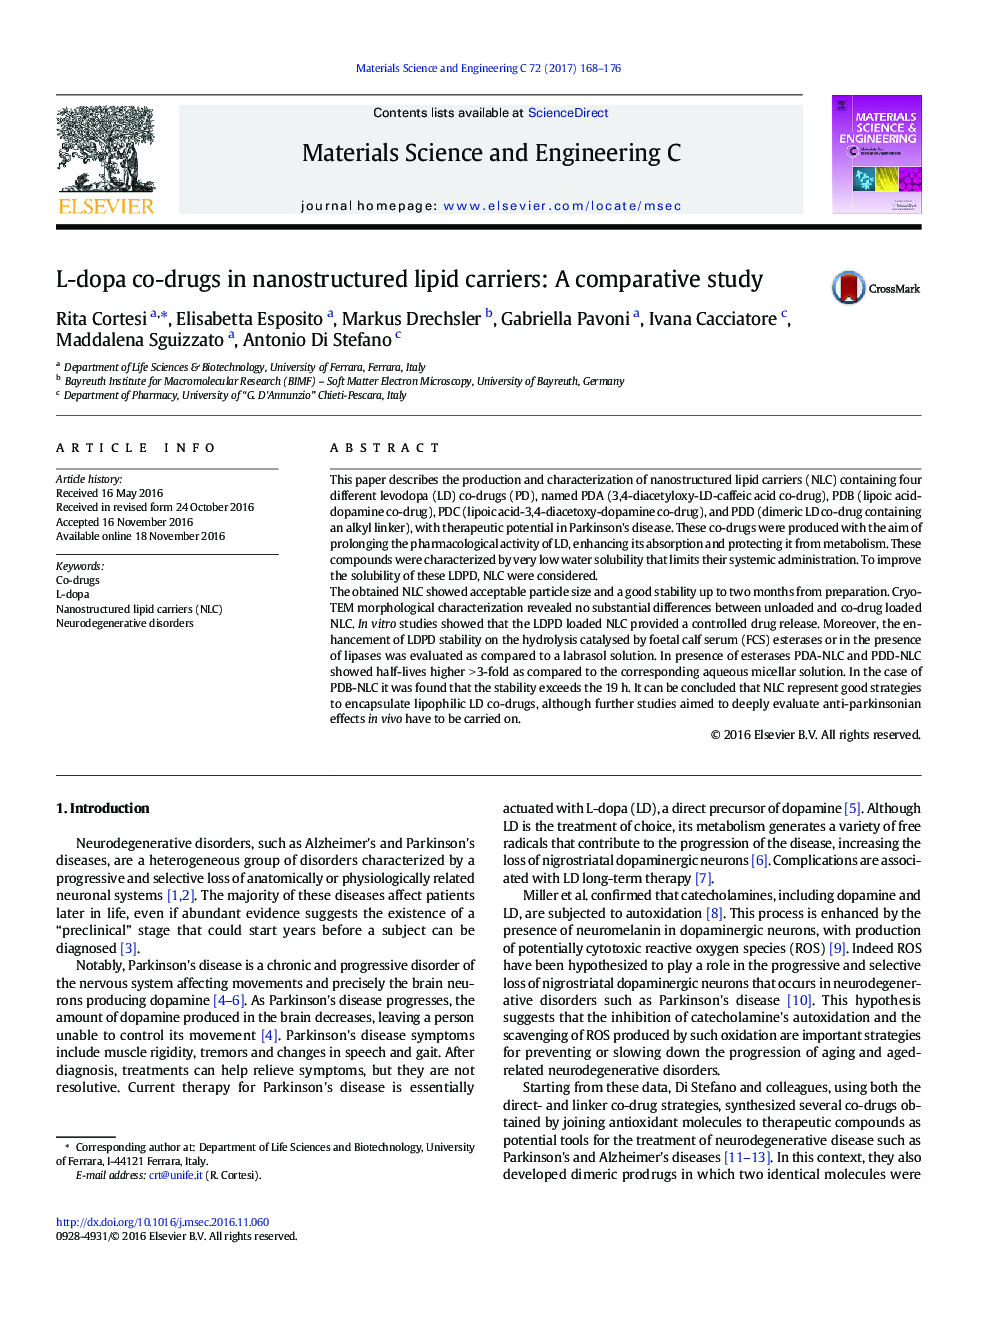 L-dopa co-drugs in nanostructured lipid carriers: A comparative study